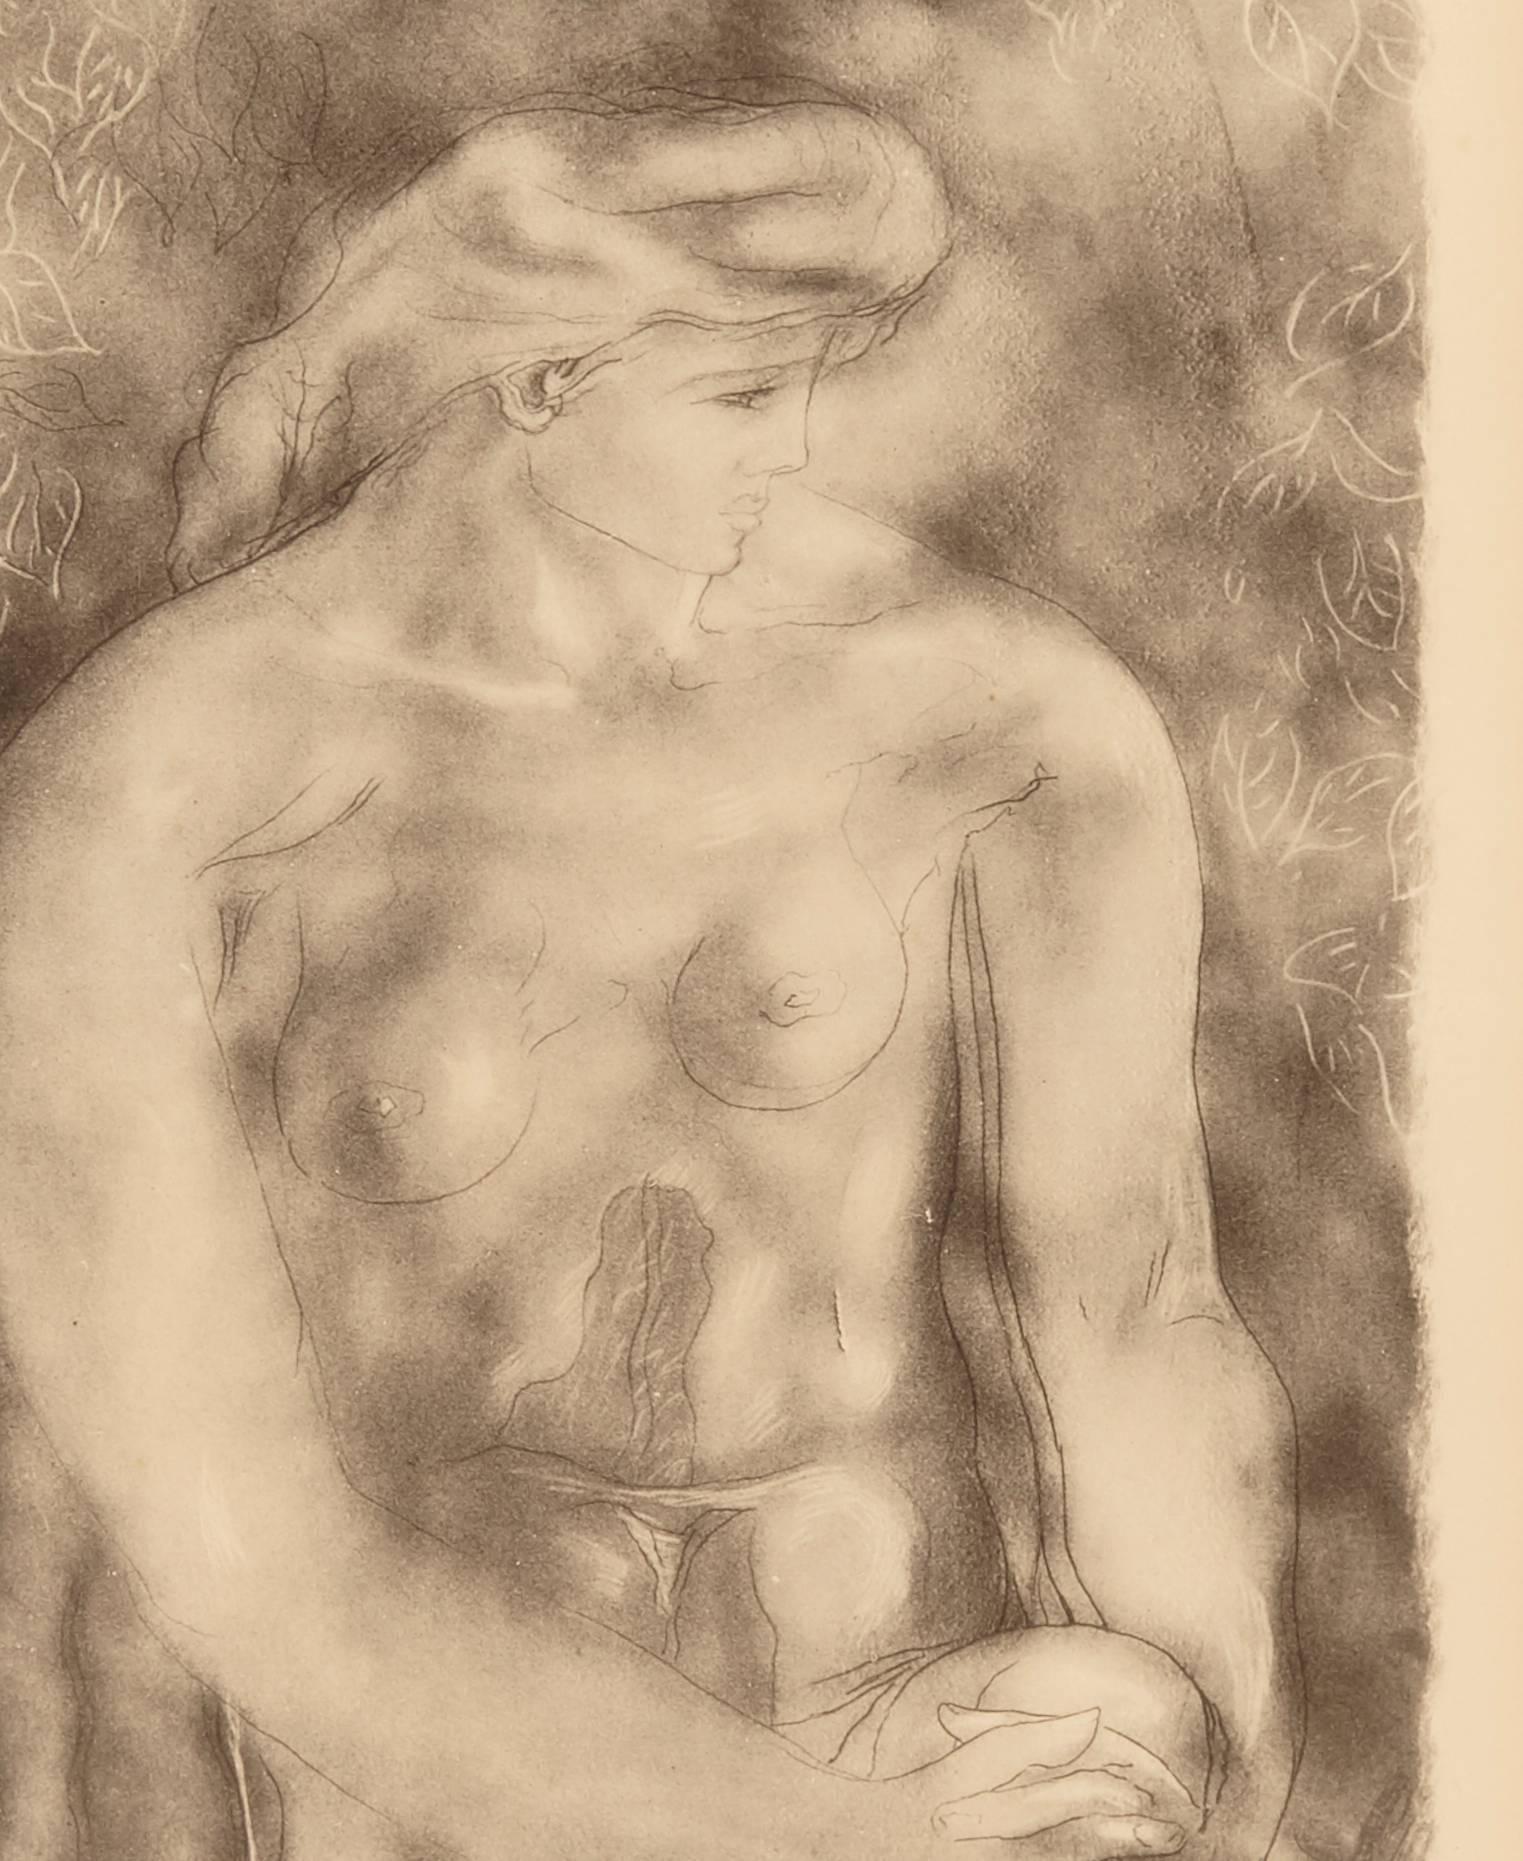 Georges Braque Nude 1957 Collotype “Nu Aux Feulles” - Art Deco Print by (after) Georges Braque